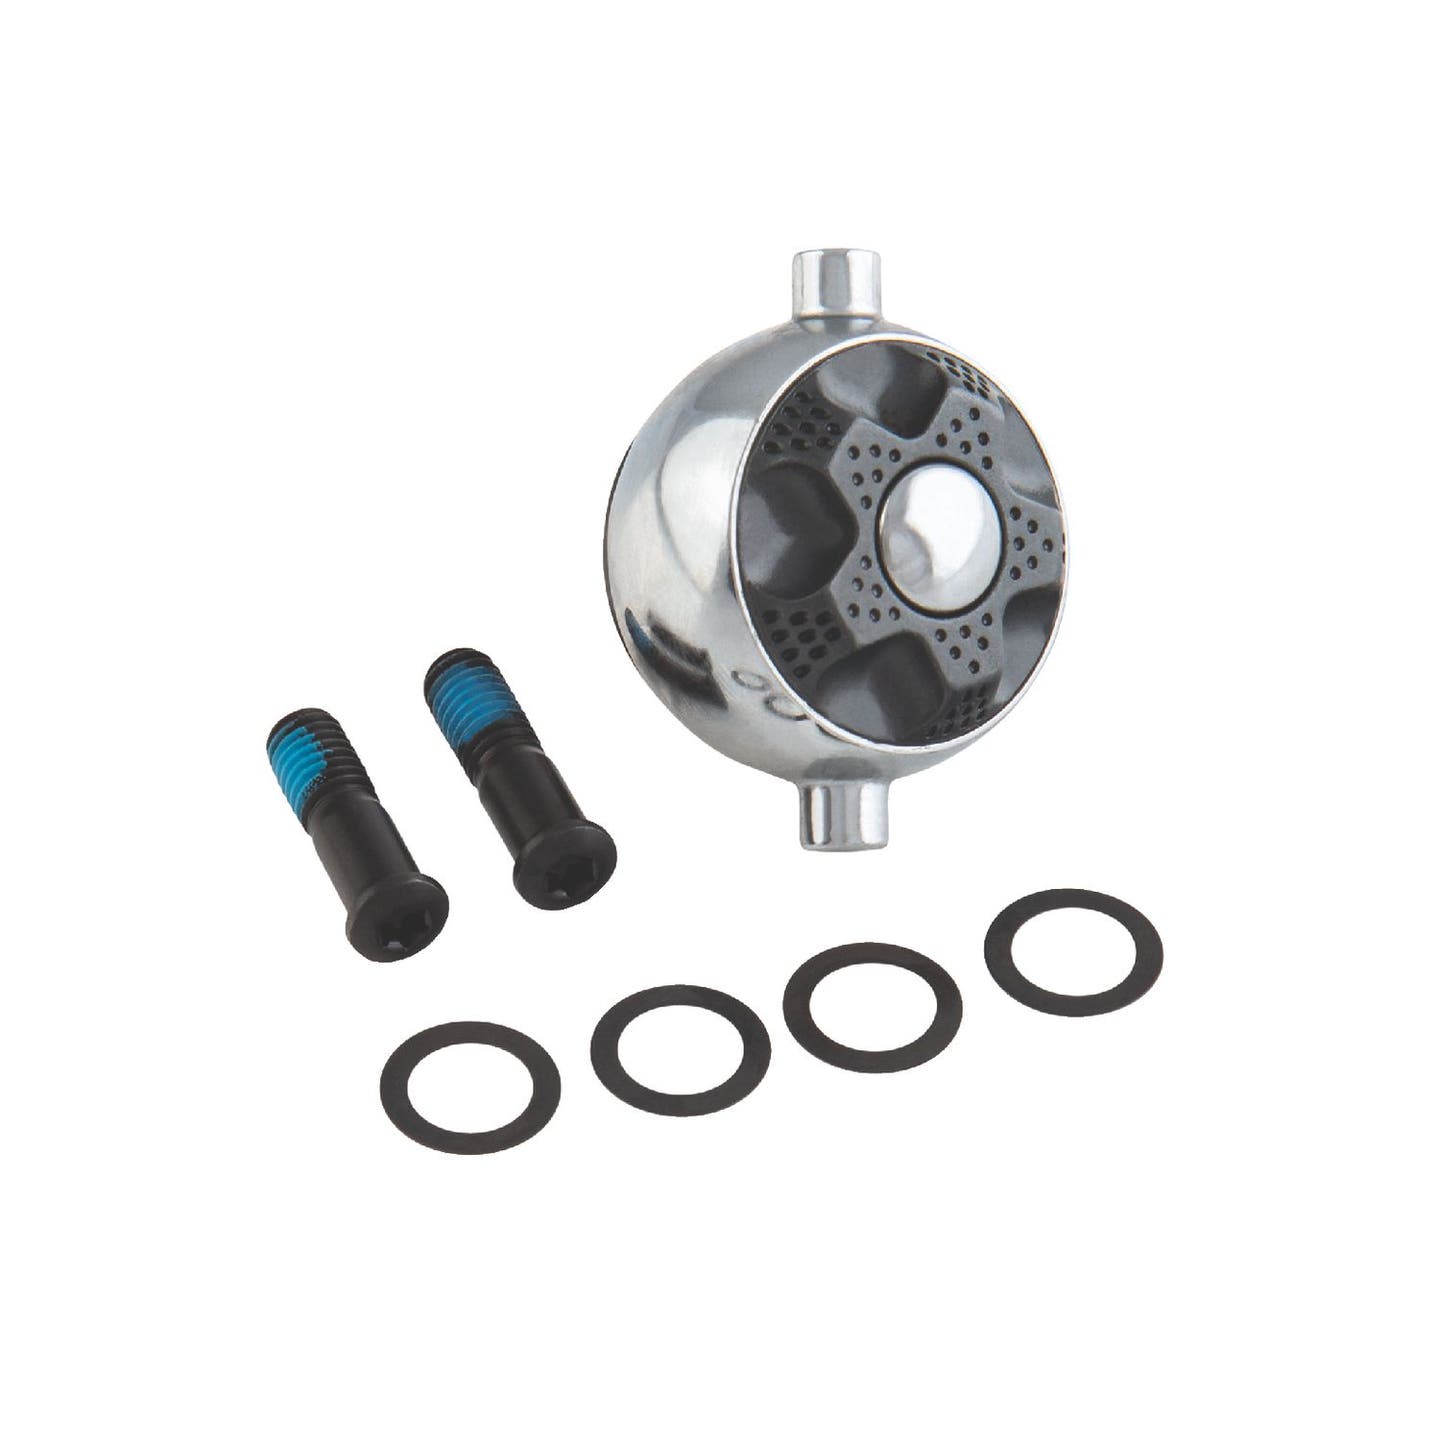 HEAD KIT FOR BR10STA 3/8"